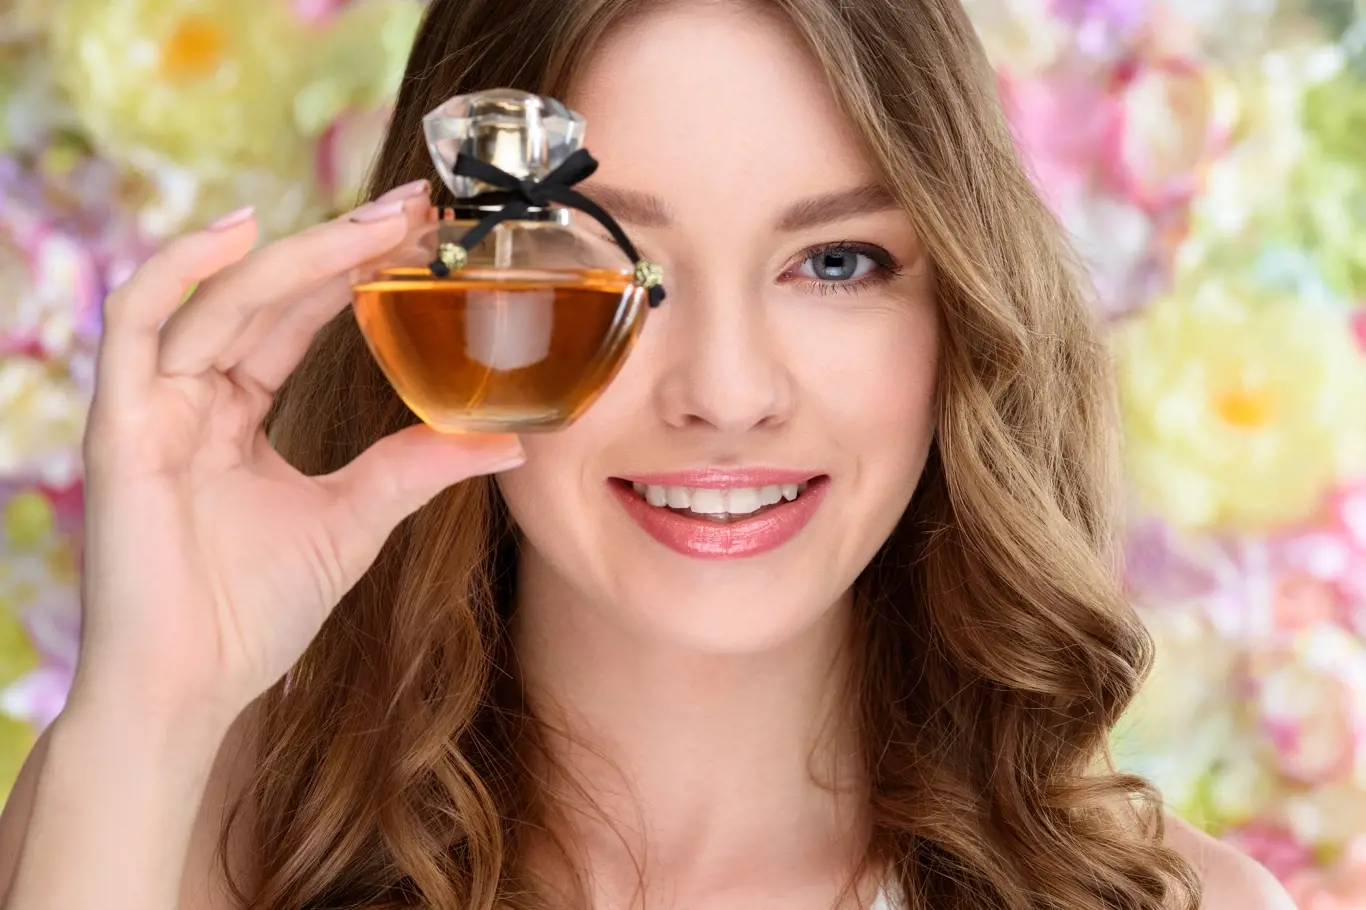 close-up portrait of smiling young woman covering one eye with bottle of perfume